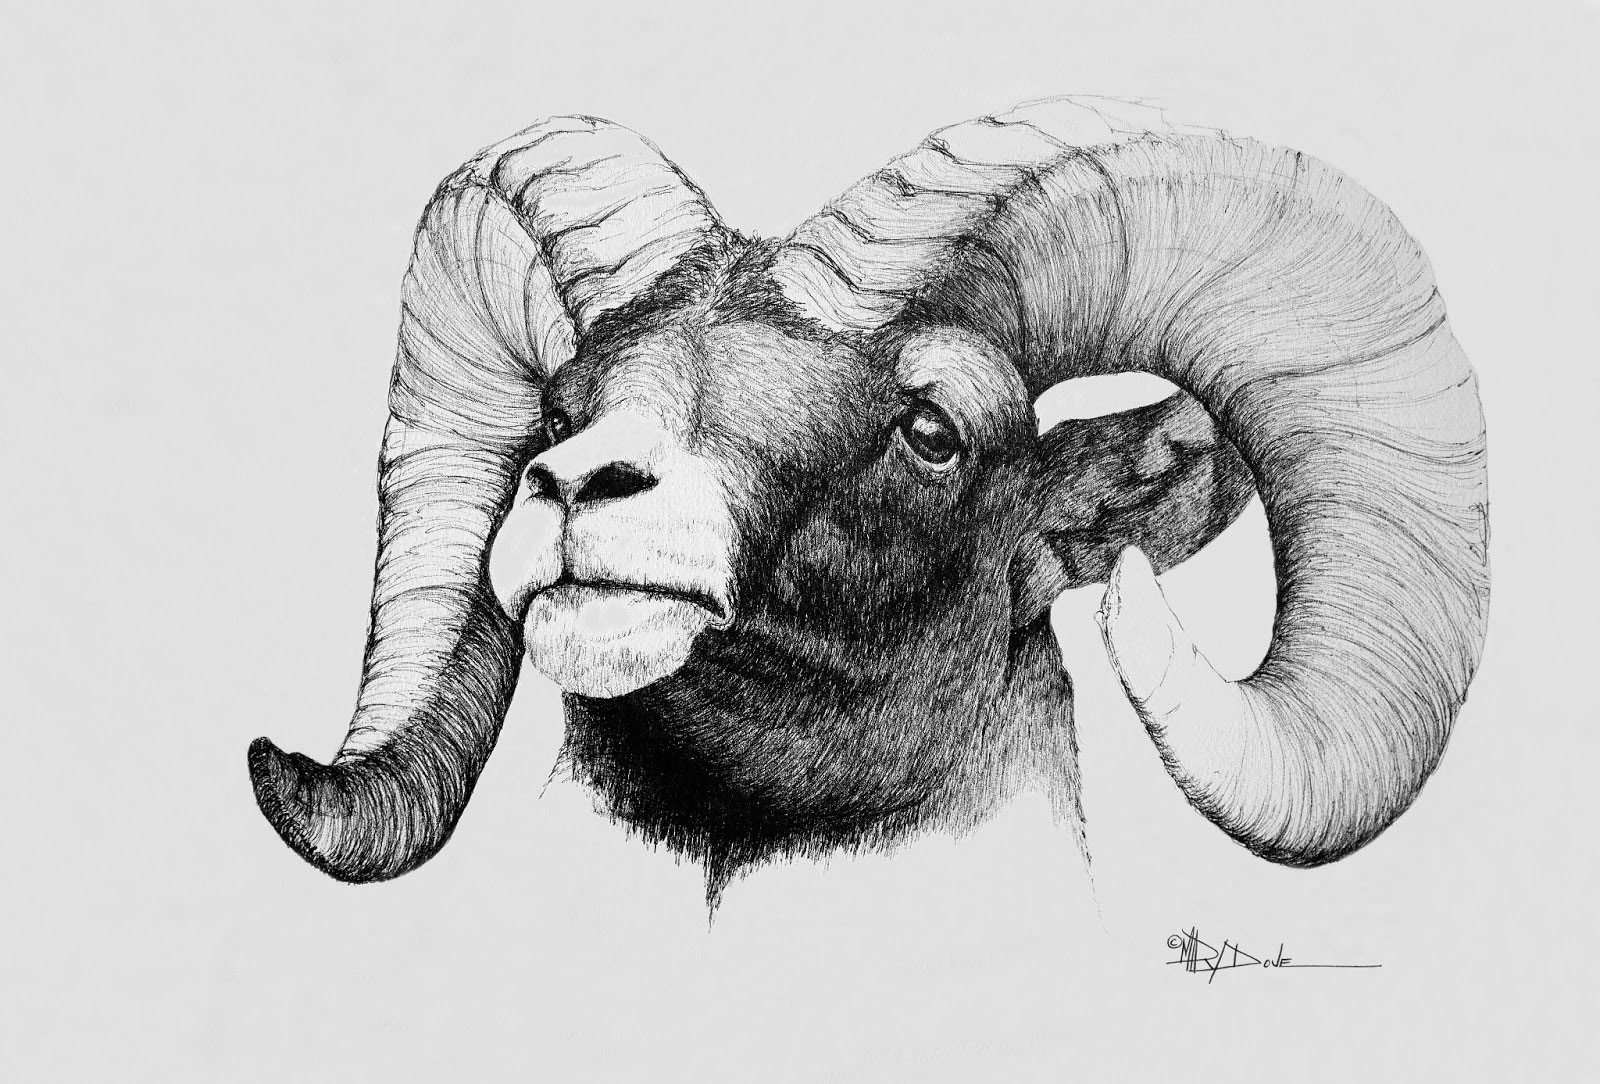 Ram drawing reference